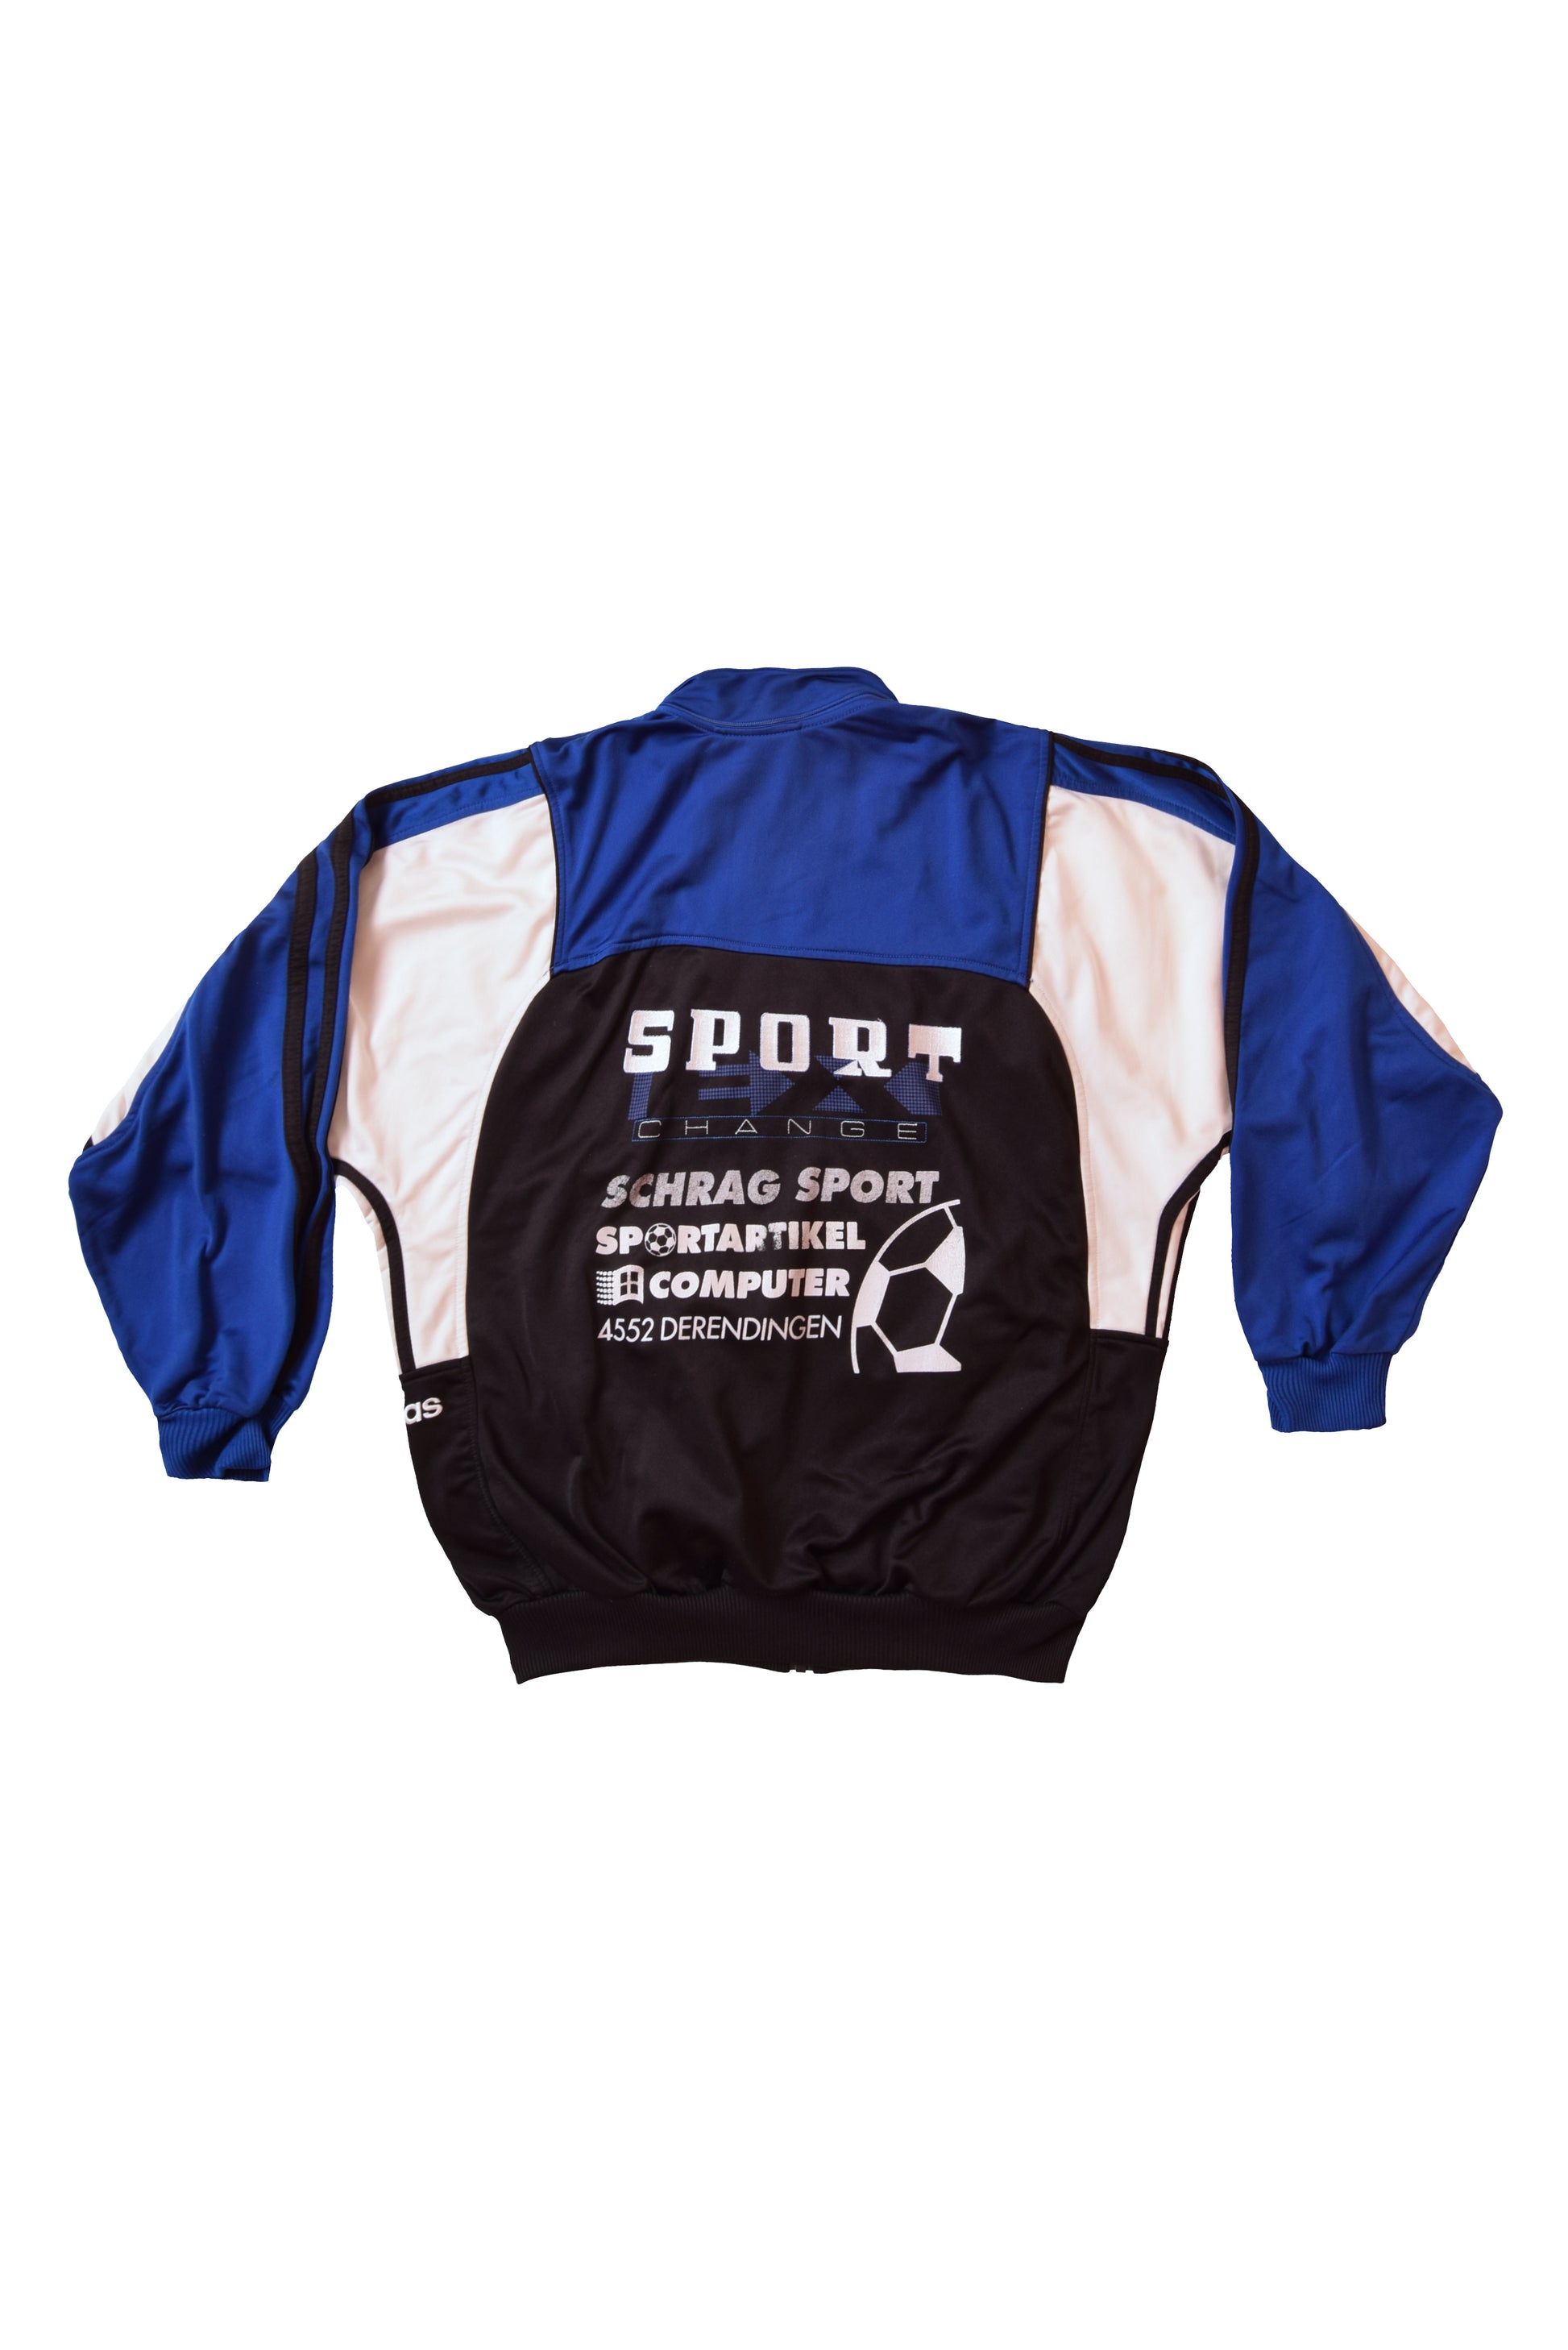 Vintage Adidas Sport Change Collection Jacket / Track Top Size M 